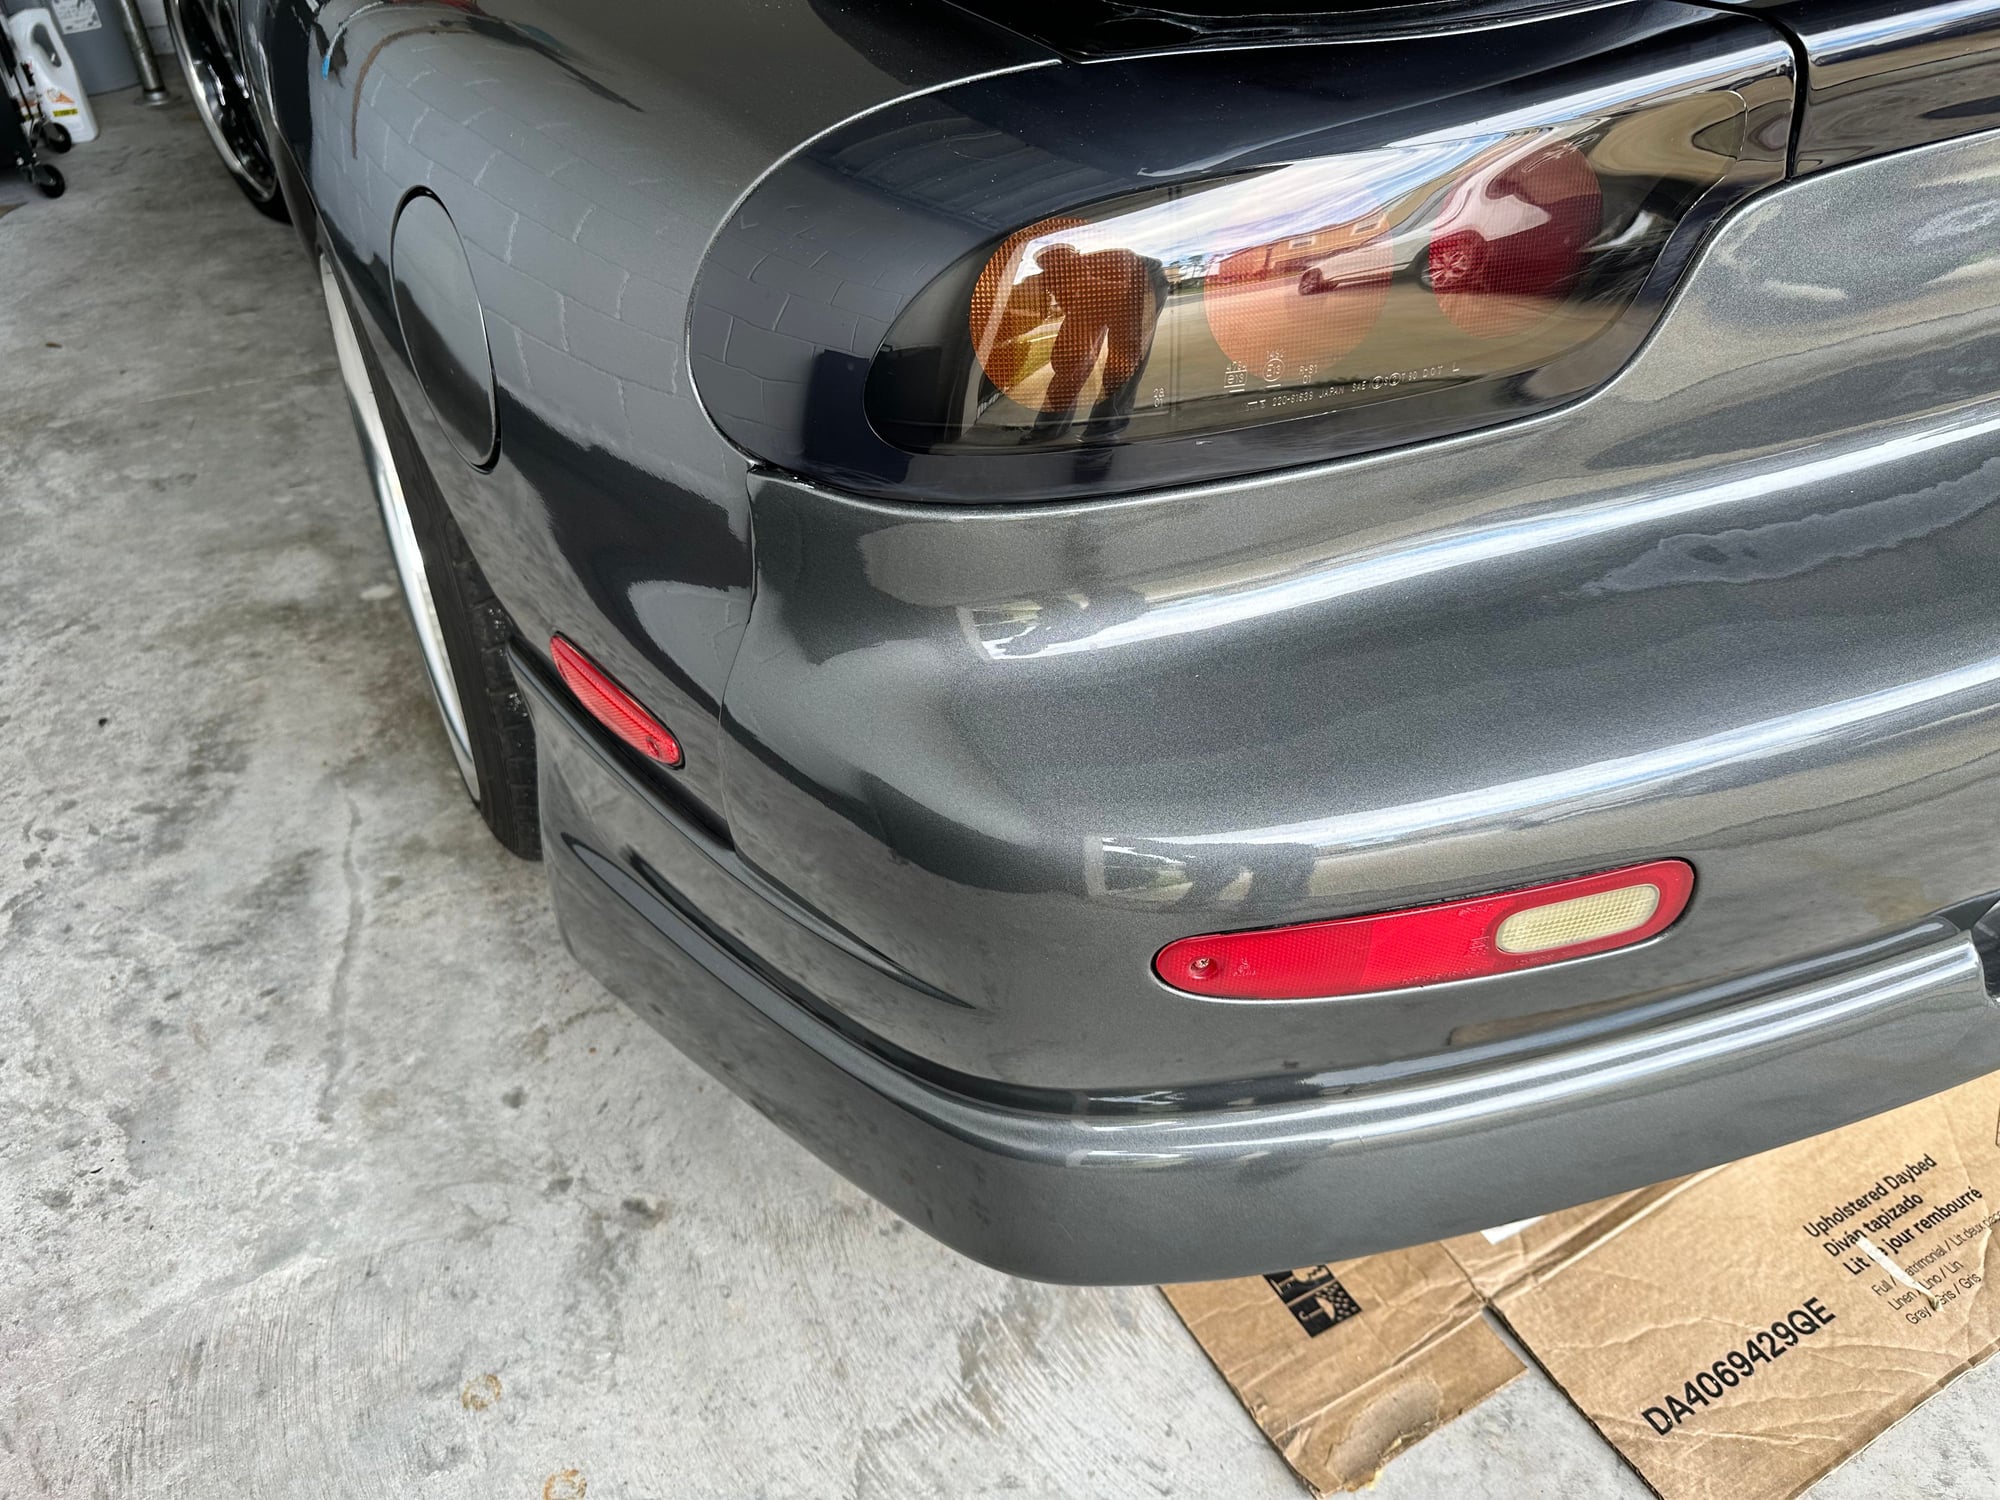 Exterior Body Parts - Origin lab side skirts and rear bumper - Used - 1992 to 2002 Mazda RX-7 - Ocoee, FL 34761, United States